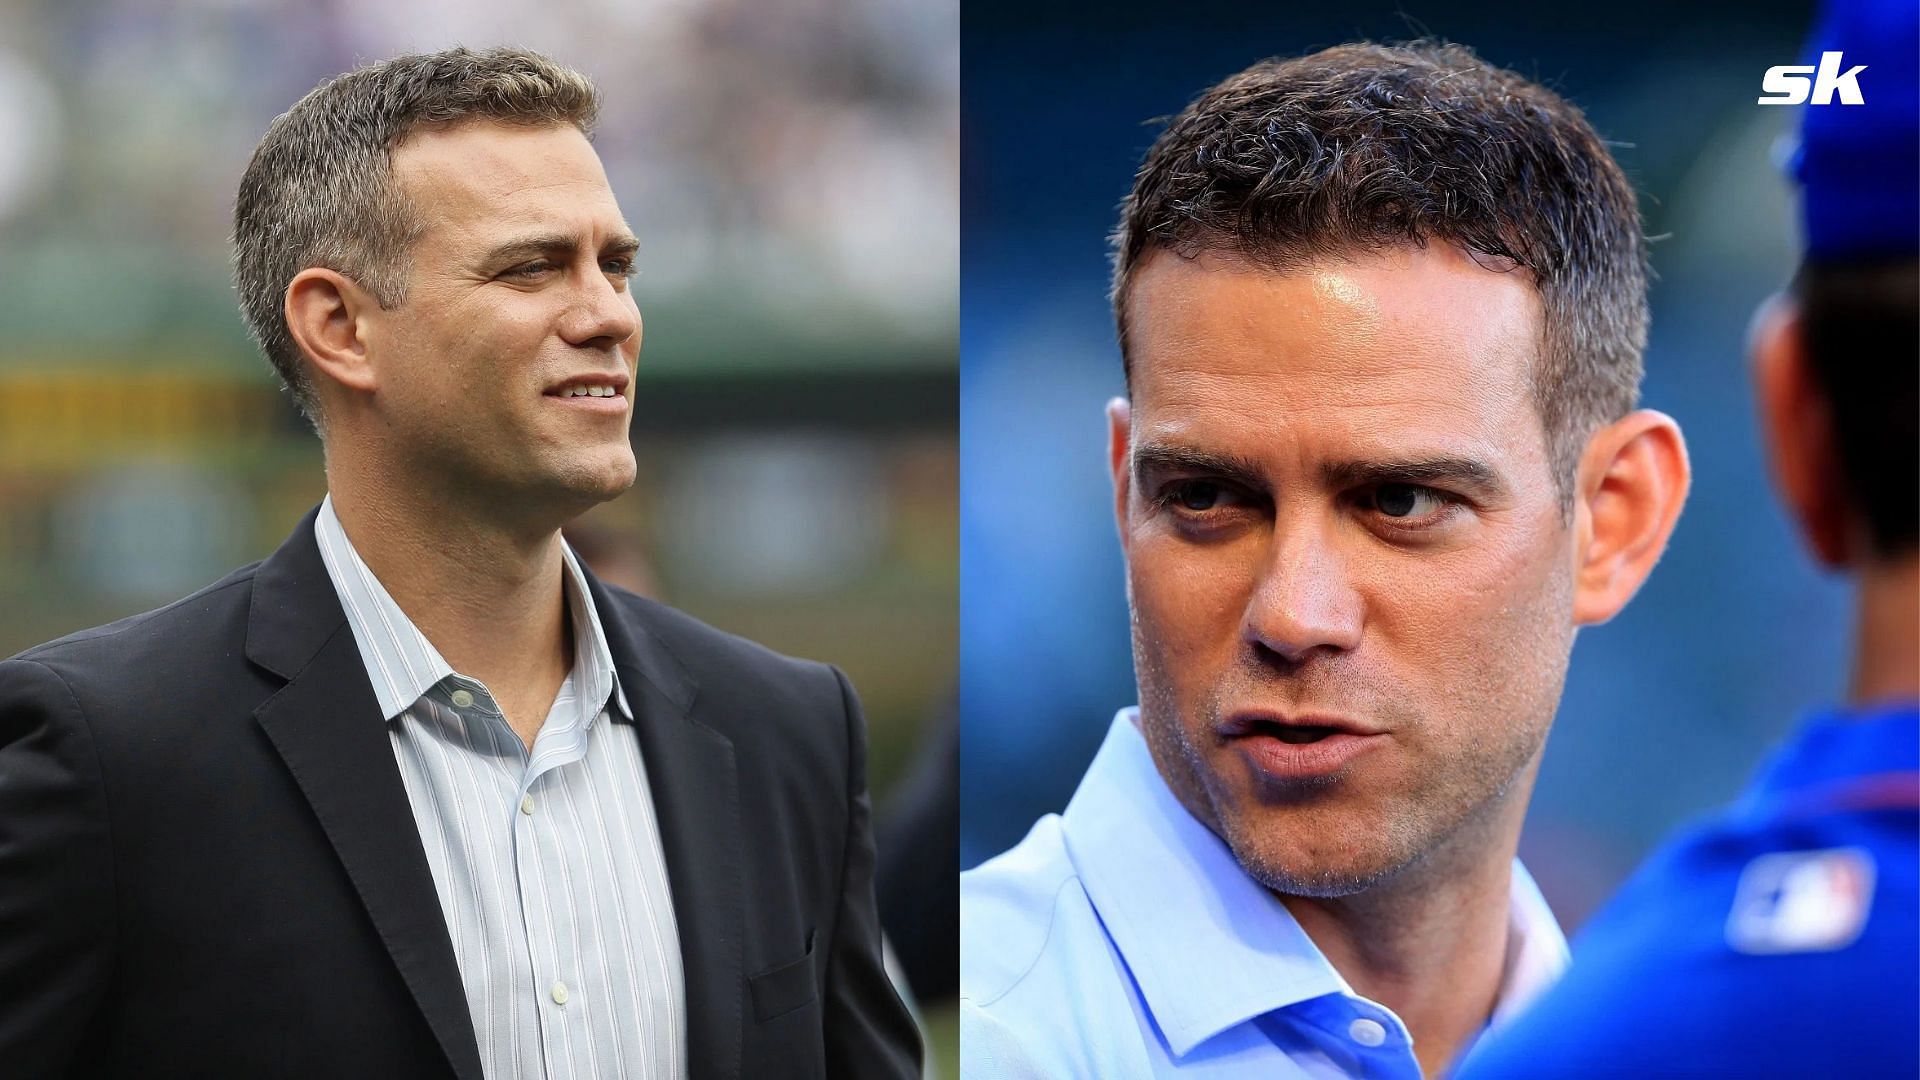 Who is Theo Epstein